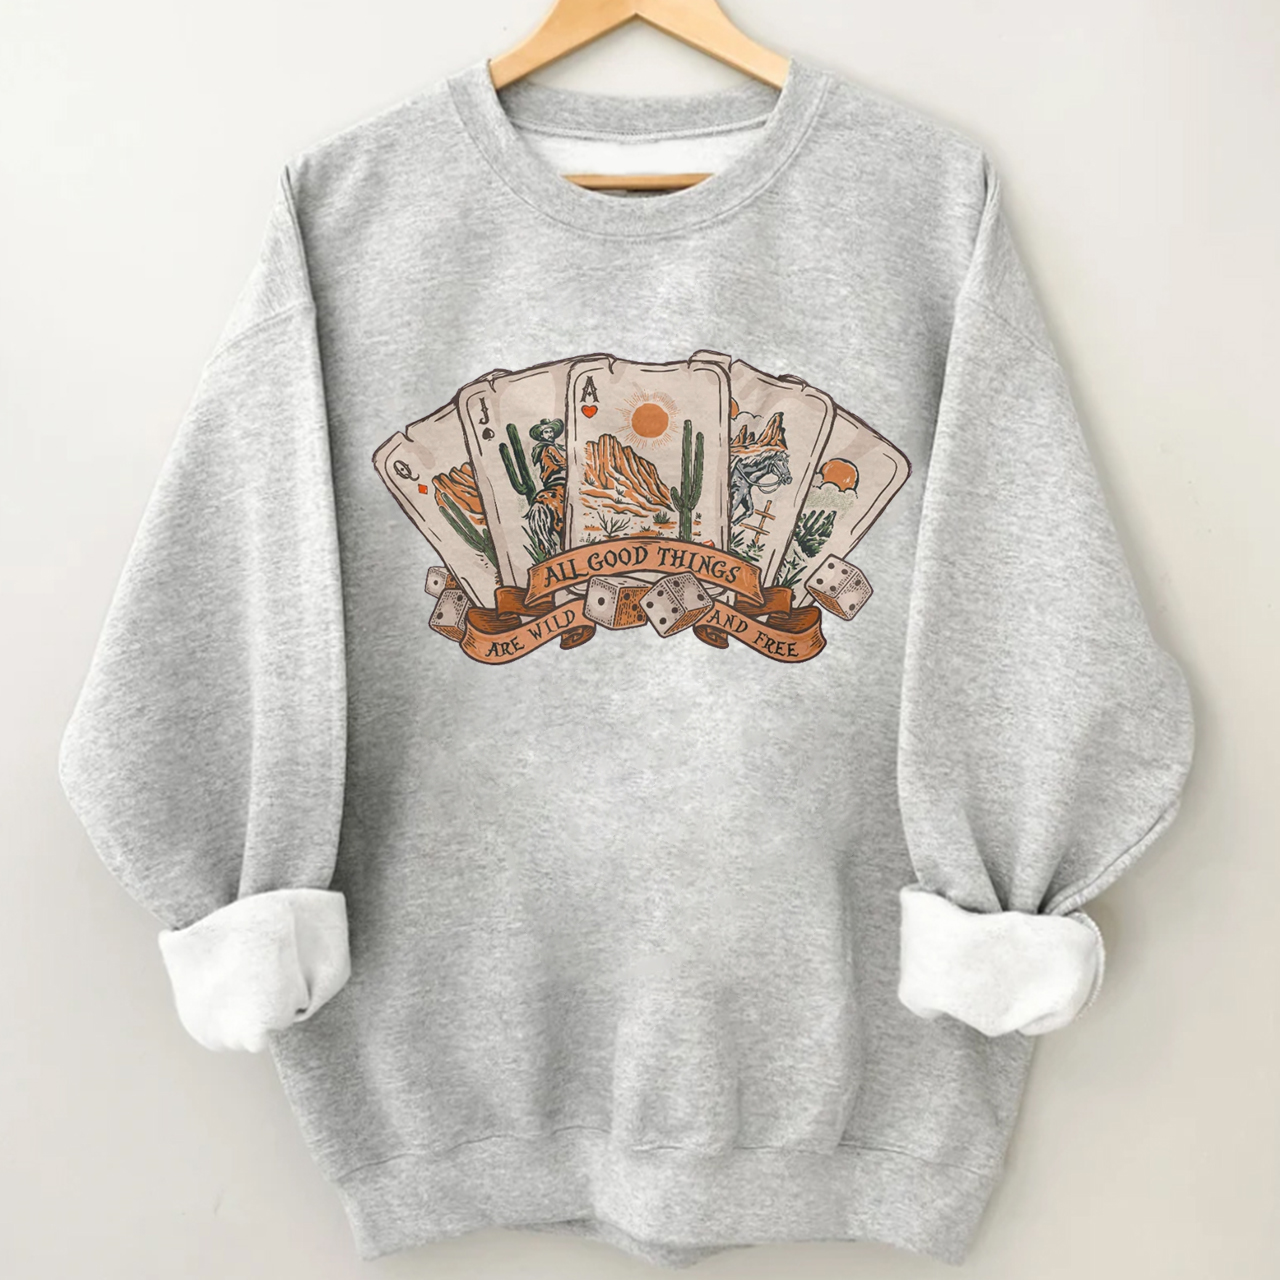 Cowboy All Good Things Are Wild And Free Sweatshirt